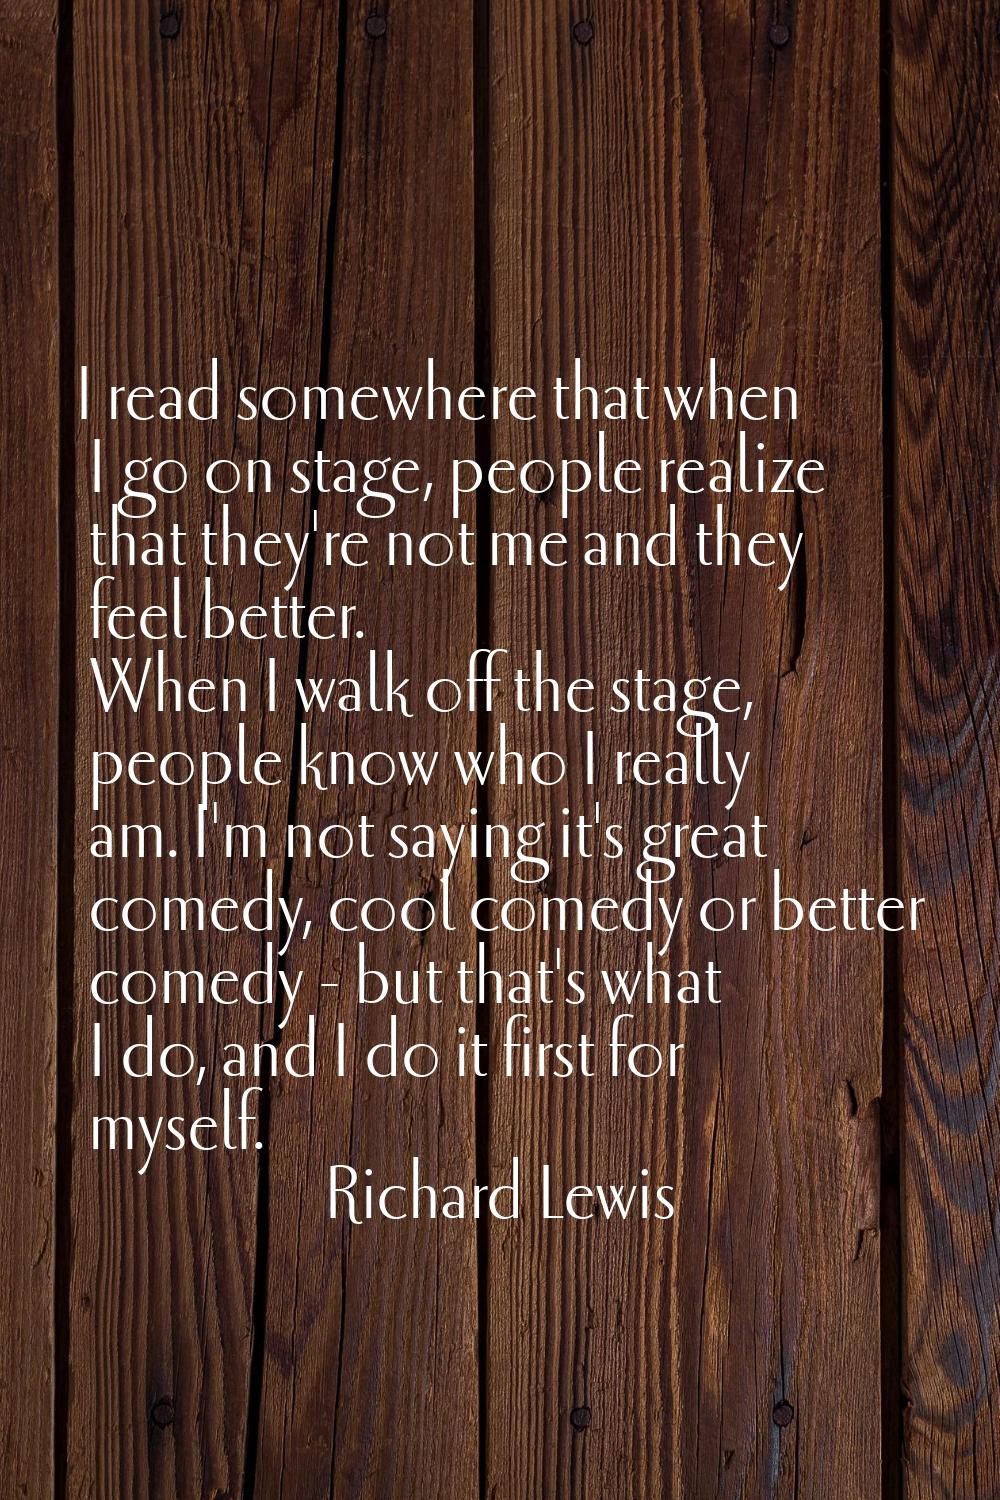 I read somewhere that when I go on stage, people realize that they're not me and they feel better. 